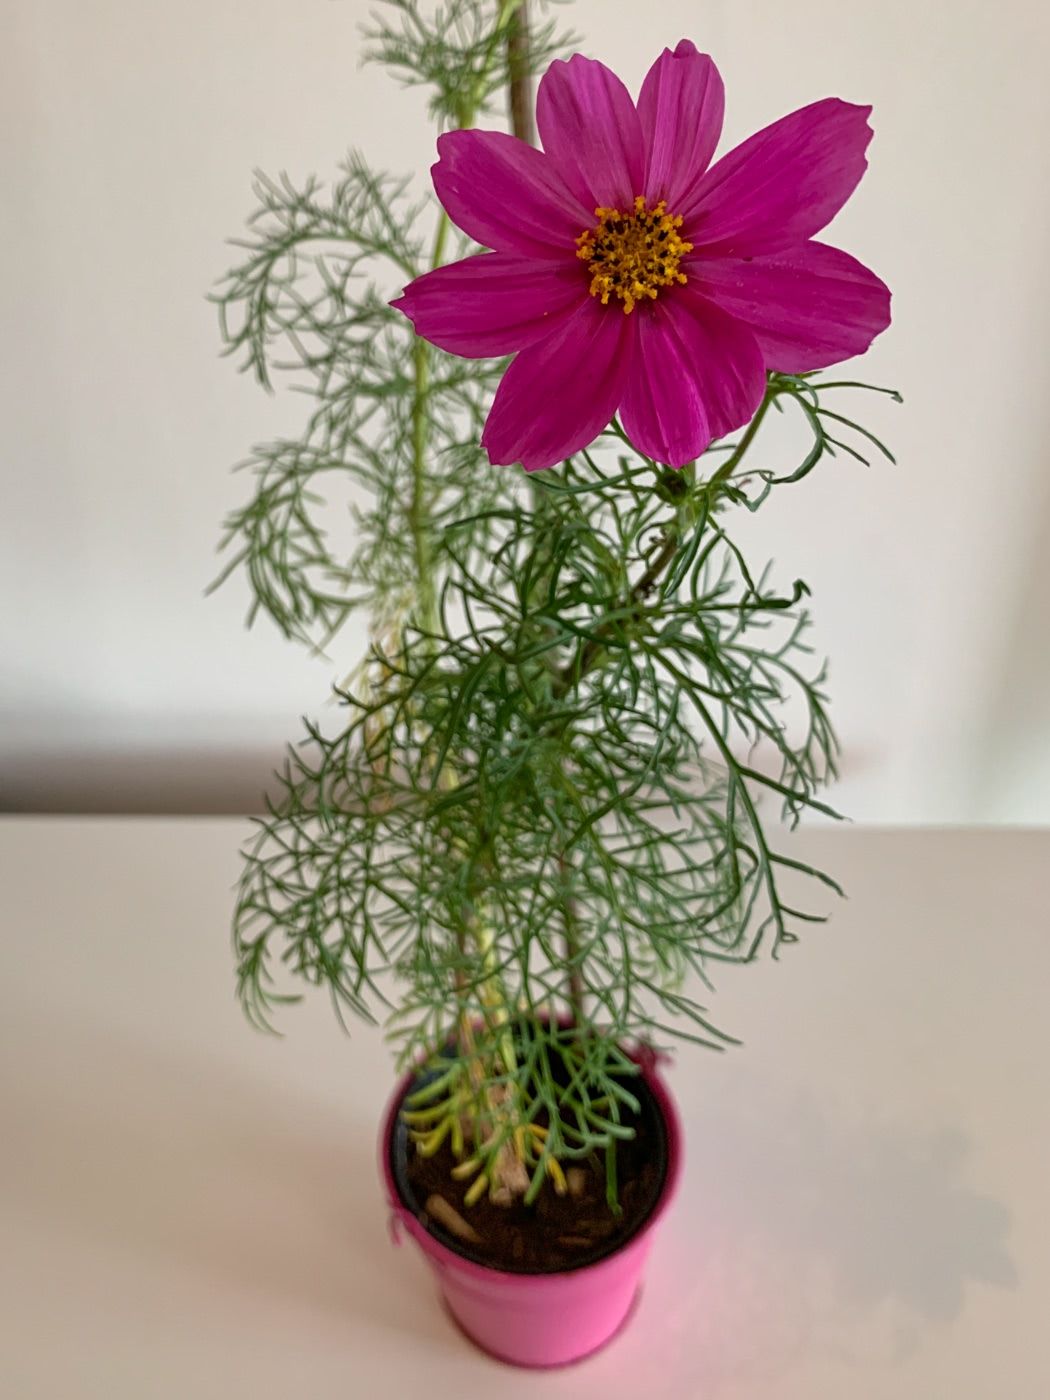 The pink cosmos flower